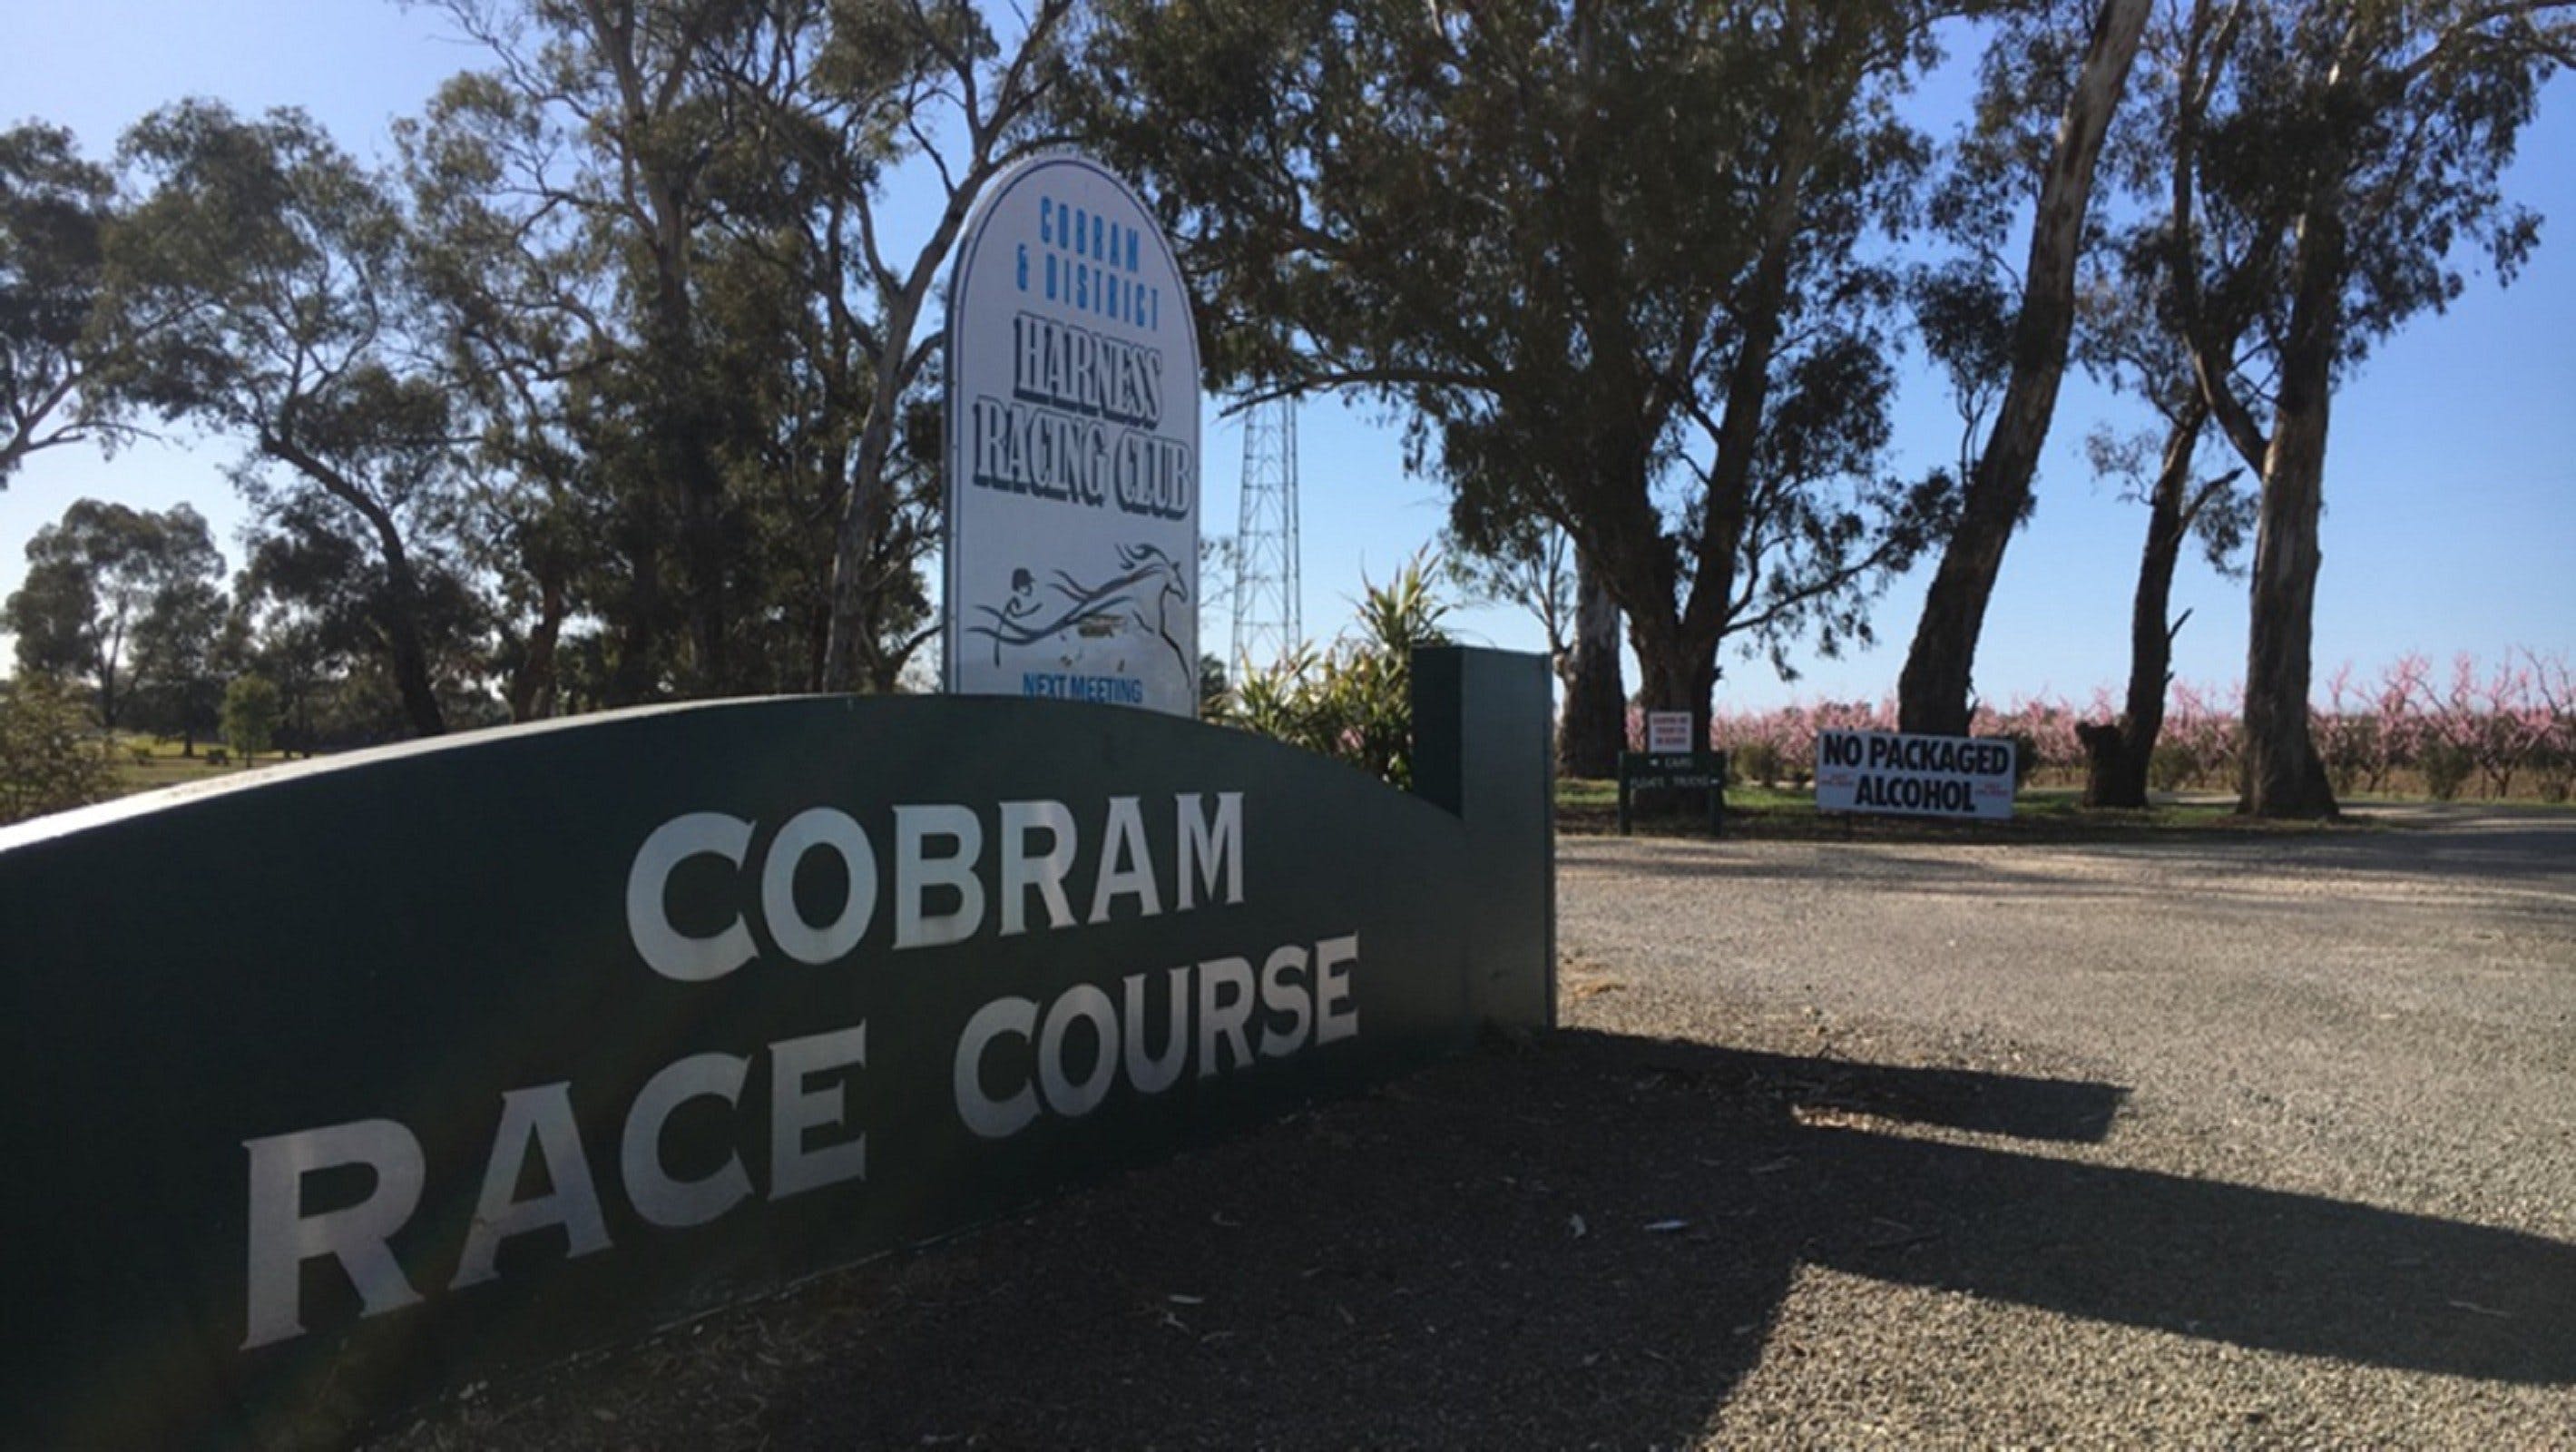 Cobram and District Harness Racing Club - Find Attractions